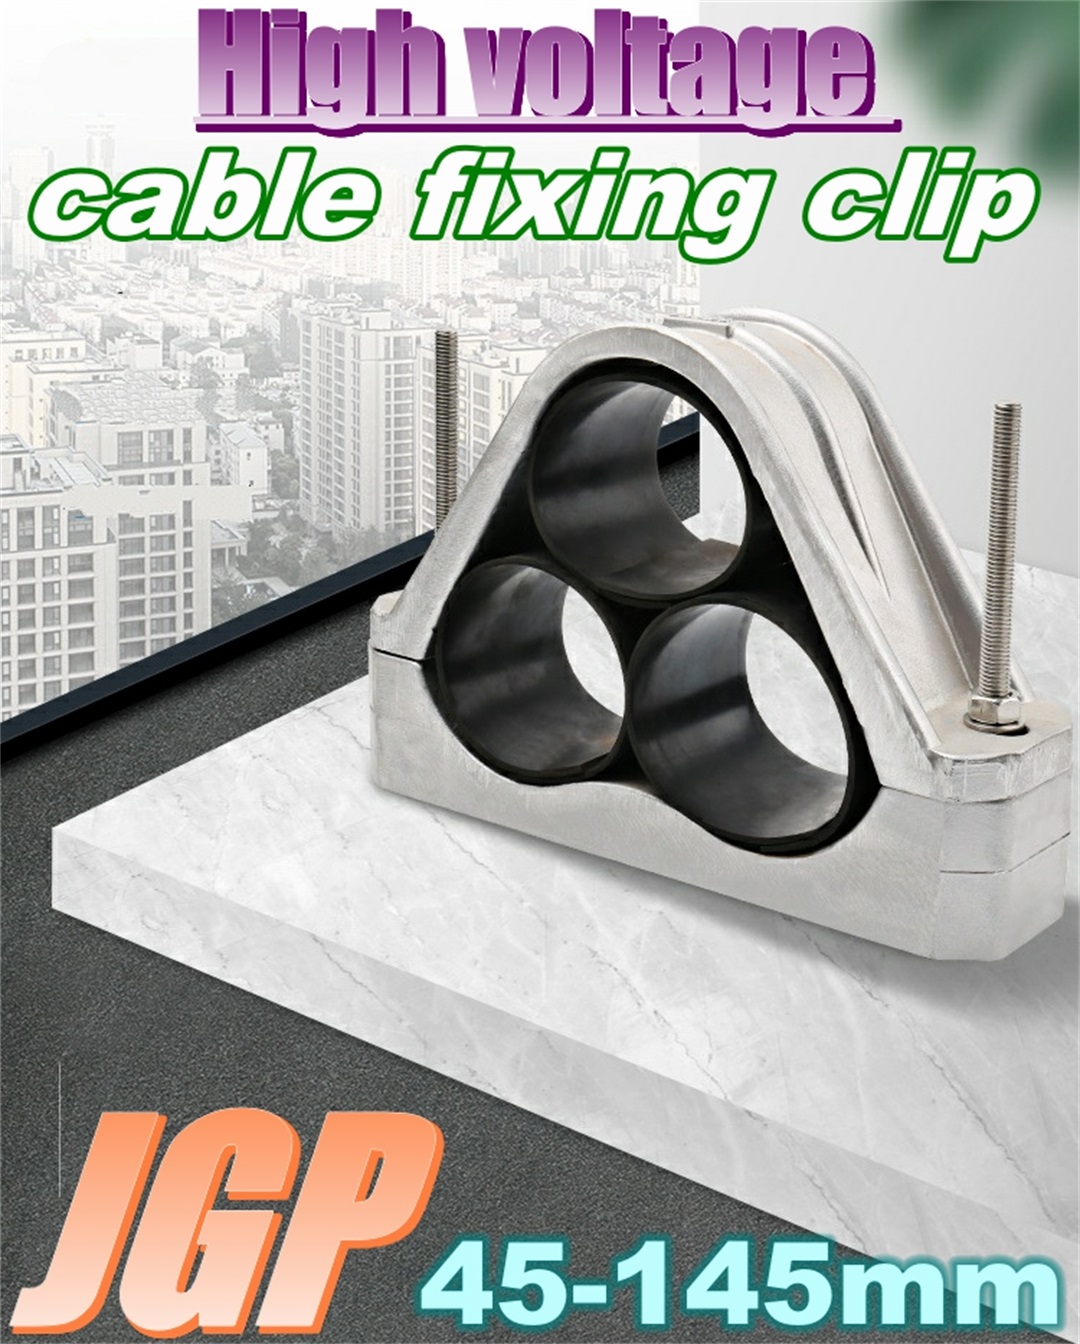 HV cable fix clamps